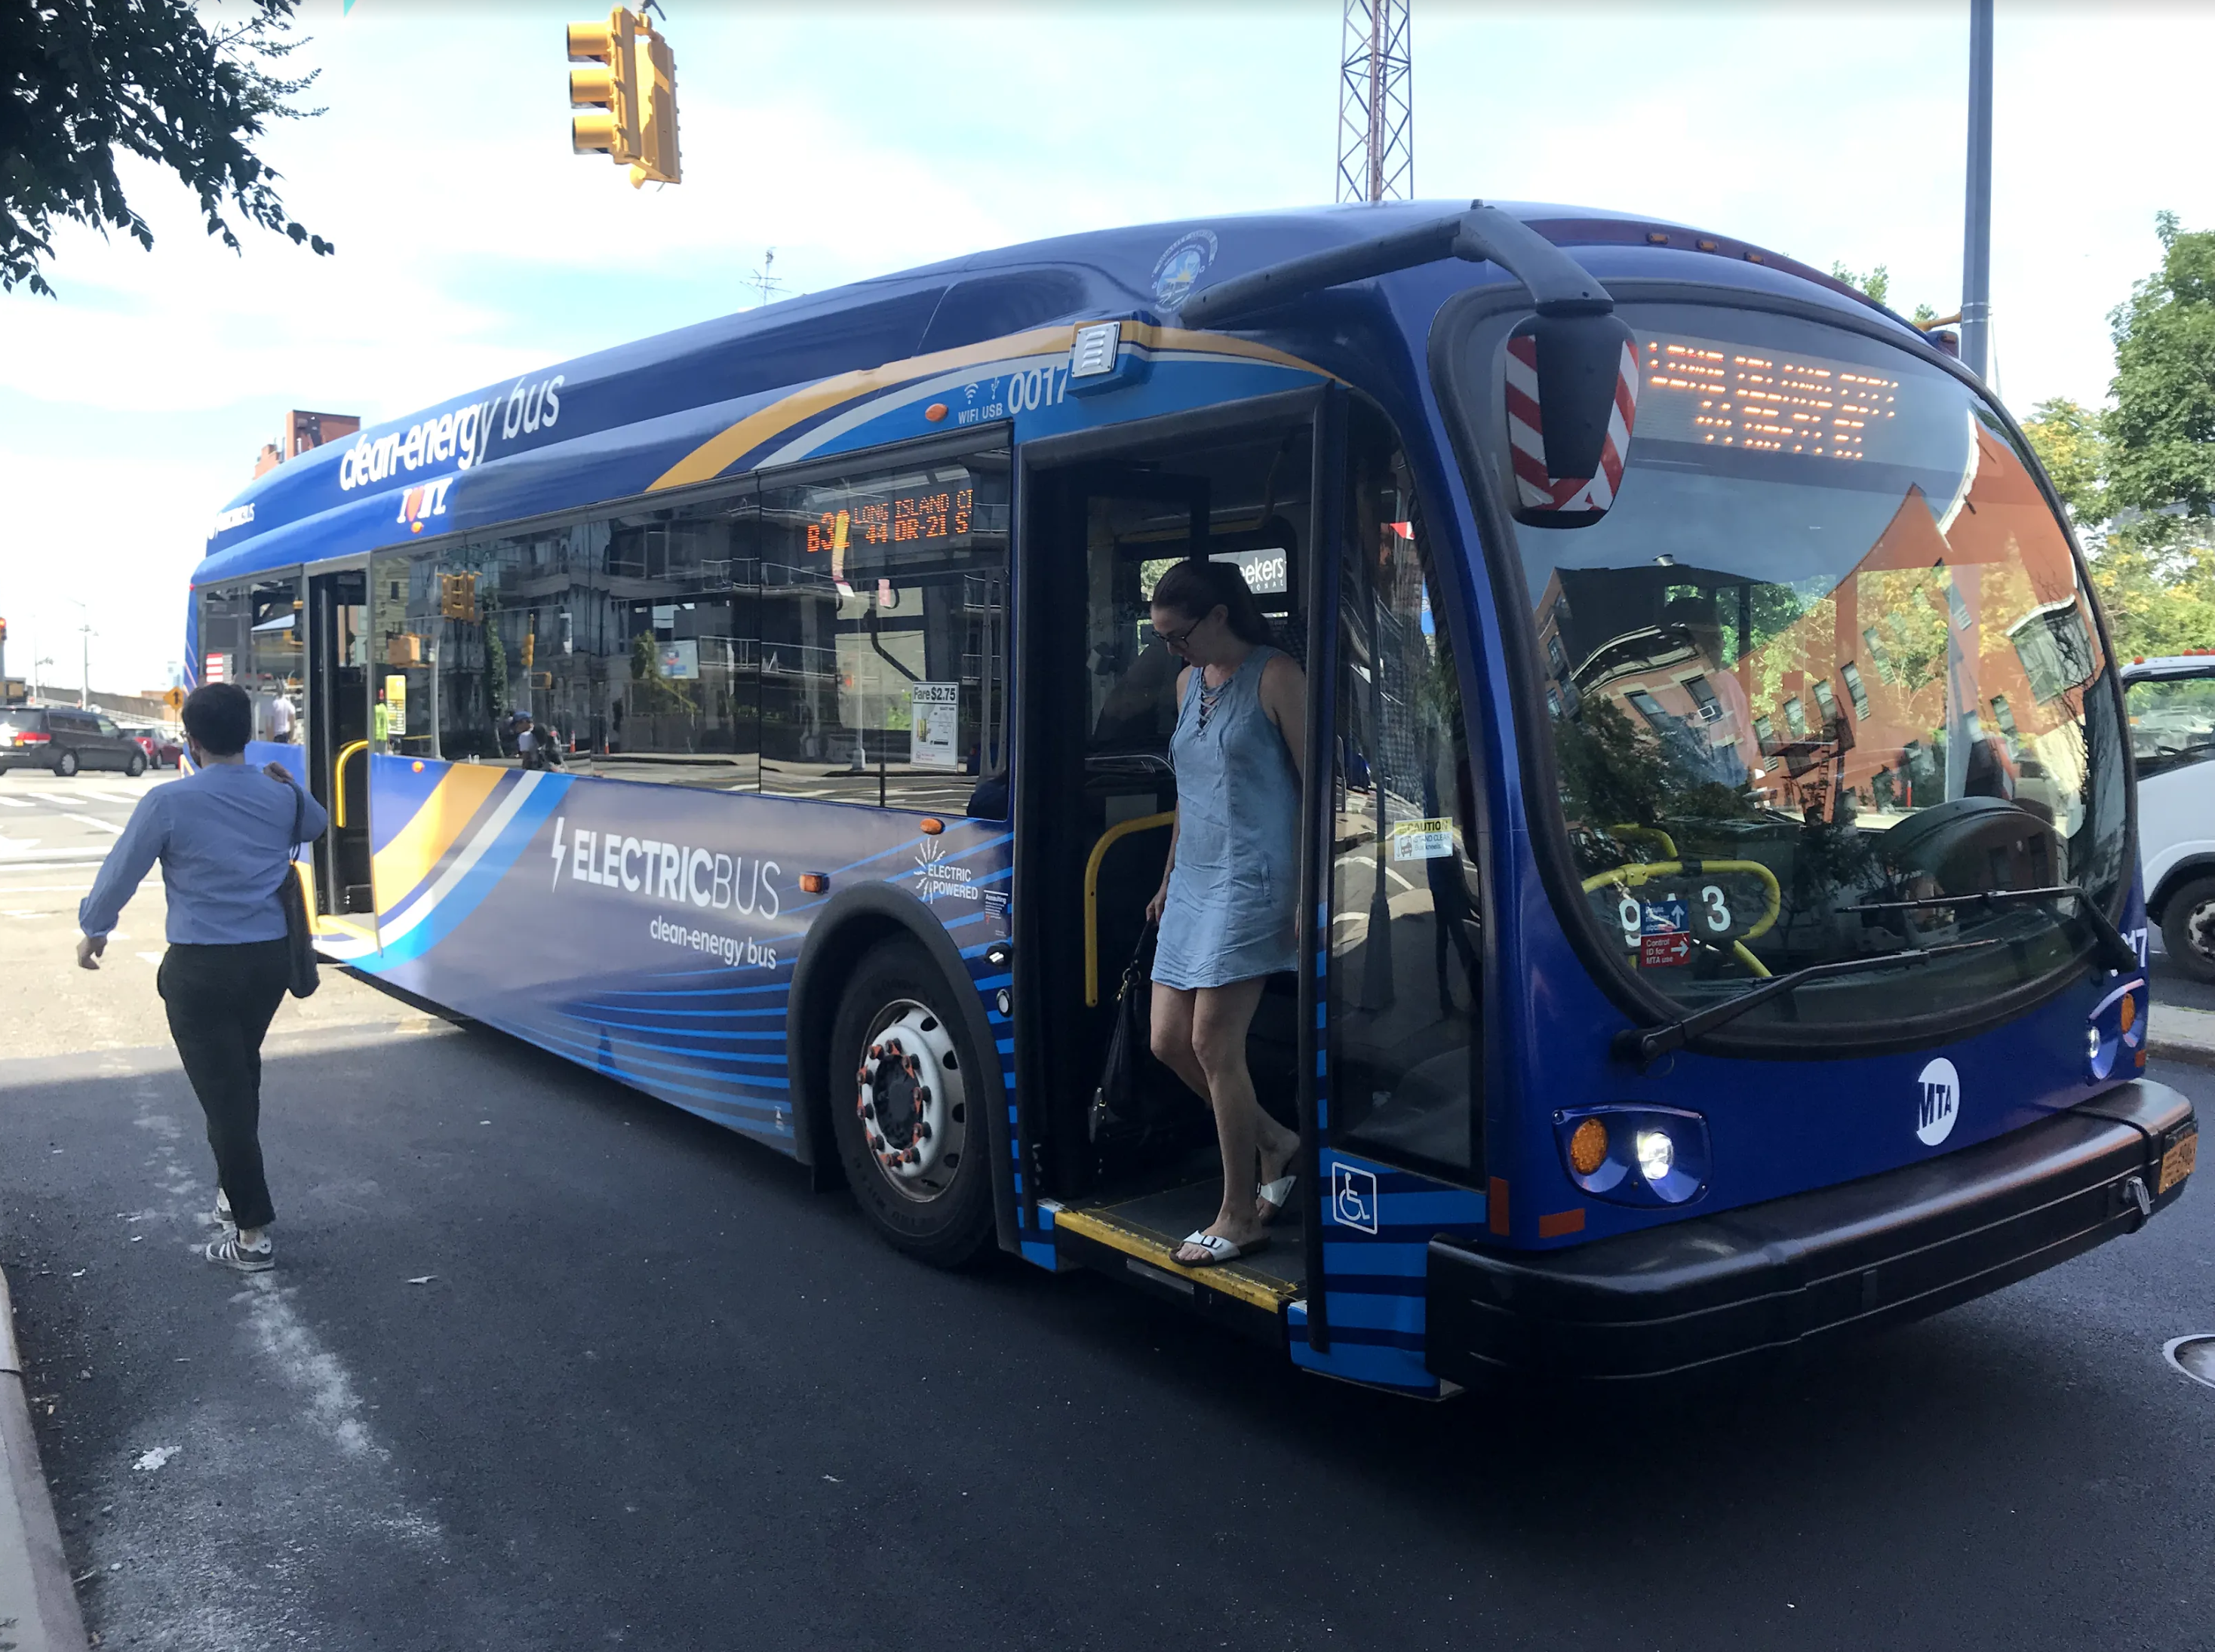 Transportation experiments continue to roll out in Greenpoint, Brooklyn. Fresh from her test rides of Chariot’s new service, Joelle Ballam boarded one of NYC Transit’s new buses plying the B32 route, to reflect on the move to all-electric bus fleets